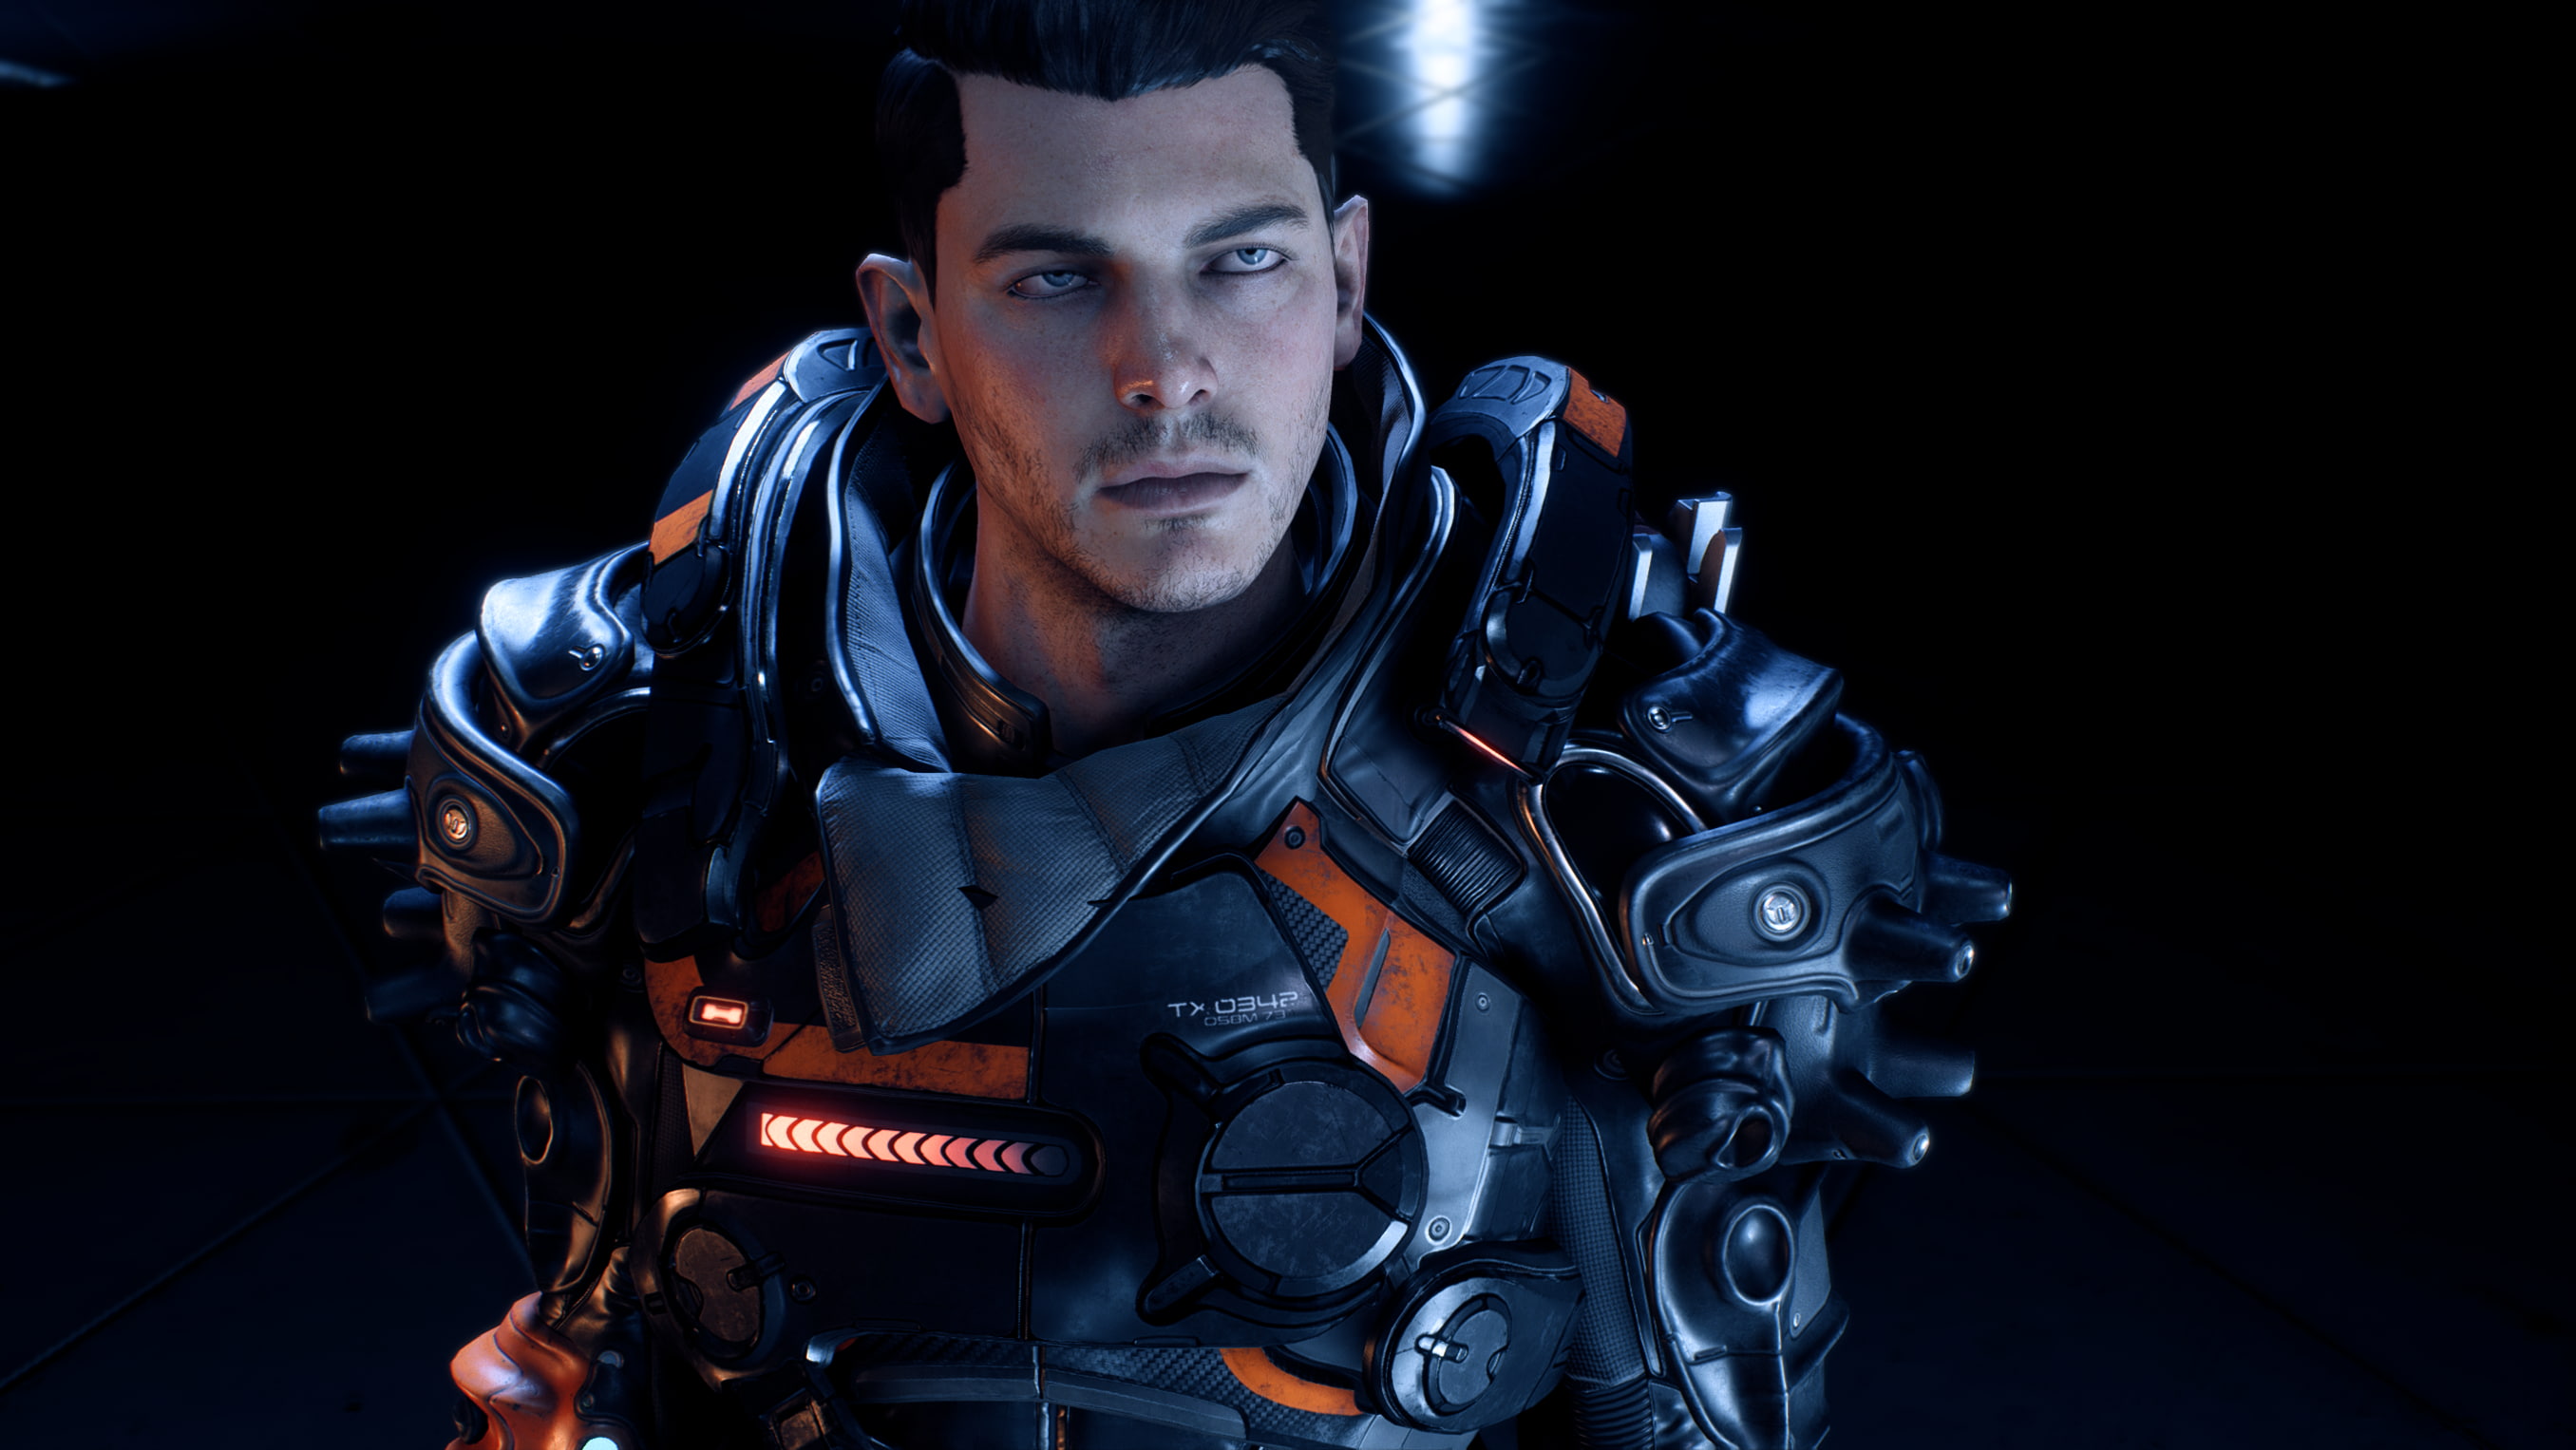 Mass Effect: Andromeda, video games, portrait, one person, looking at camera